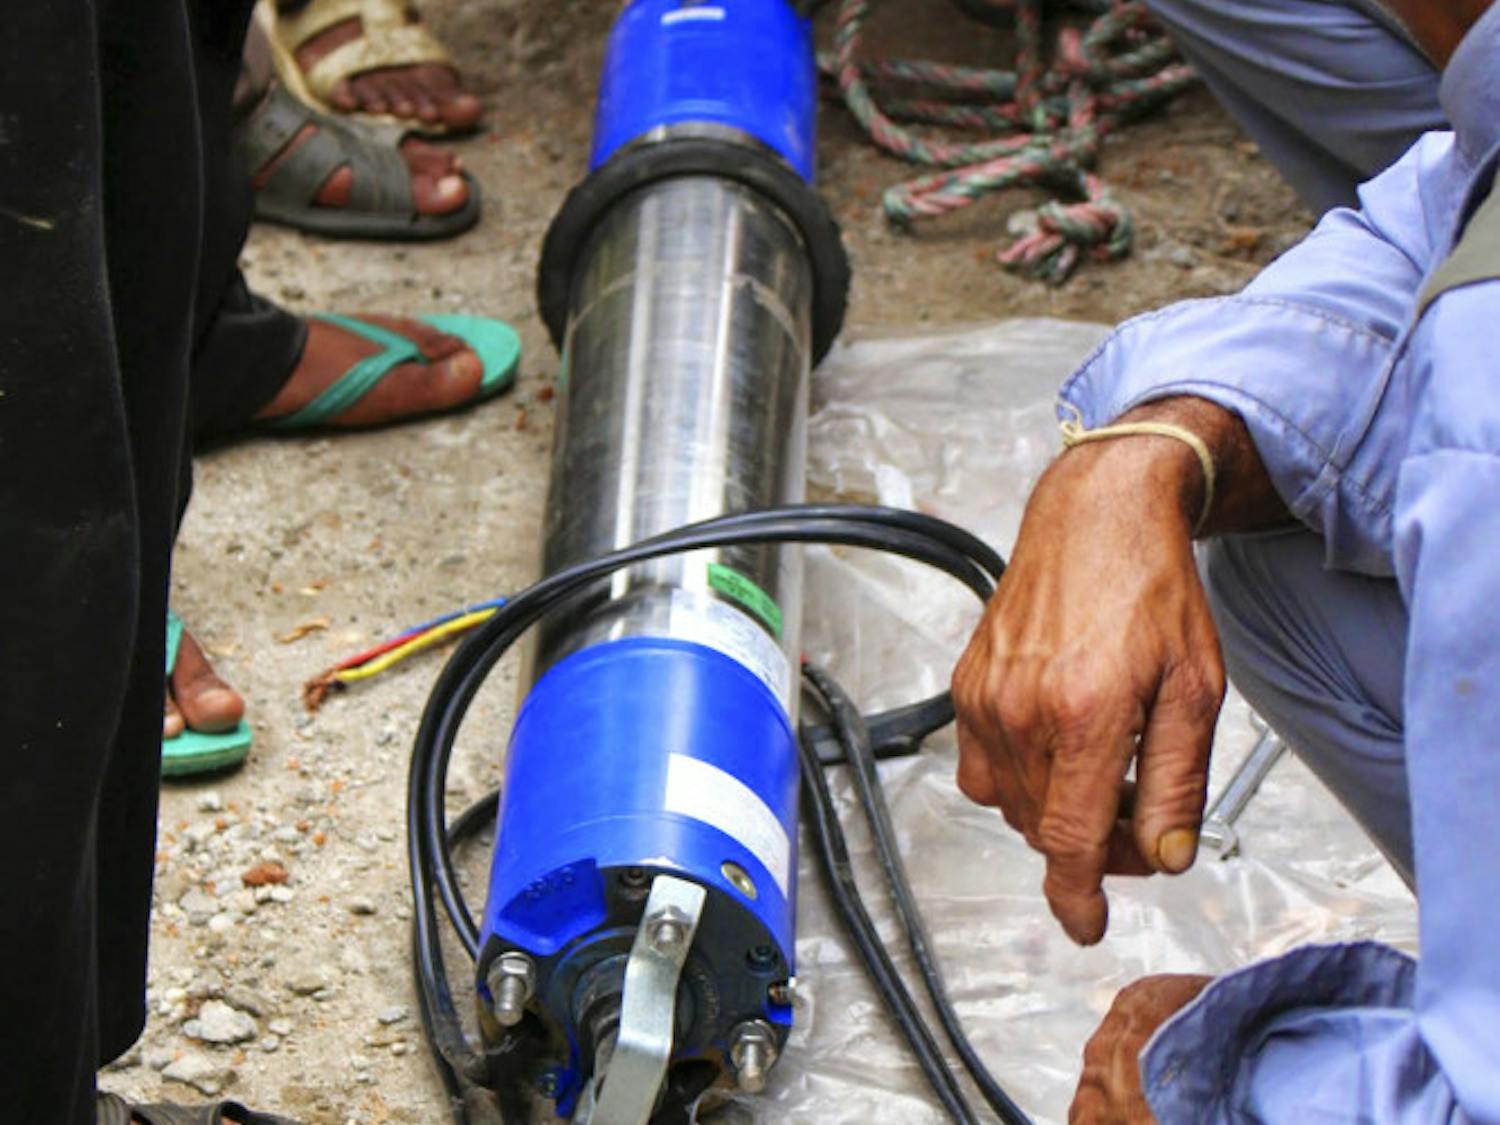 UF’s Engineers without Borders install a new water pump in Nepal during their 2014 trip. This year, the a team of about seven students will return to Nepal to build a hand-washing stations and teach hygiene programs at the local schools.